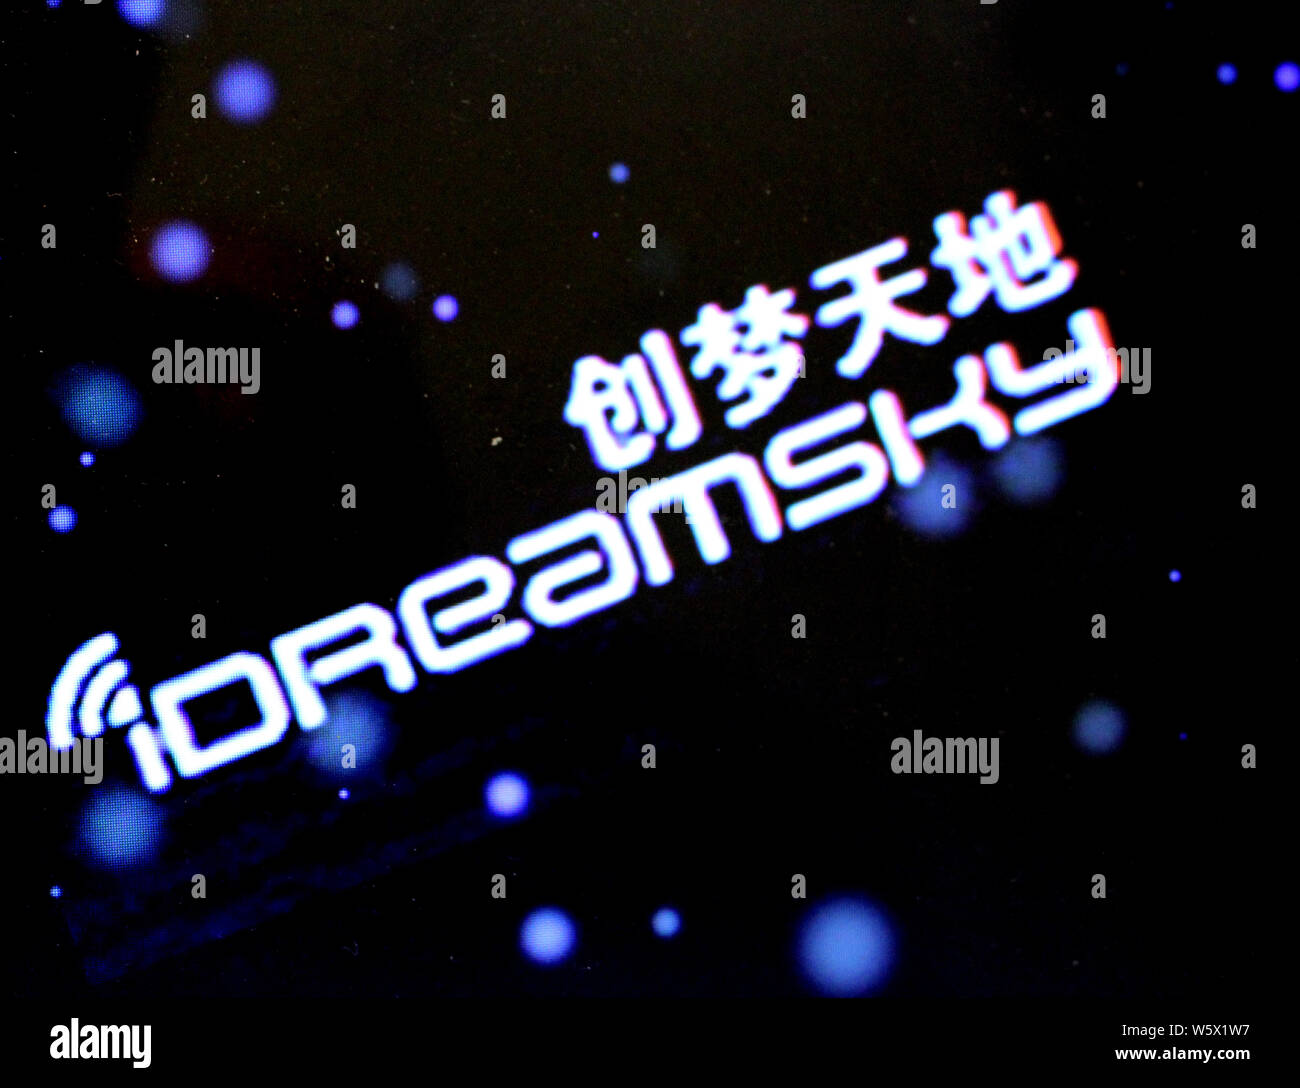 iDreamSky creates a big mobile game publishing platform in China, Page 2  of 2